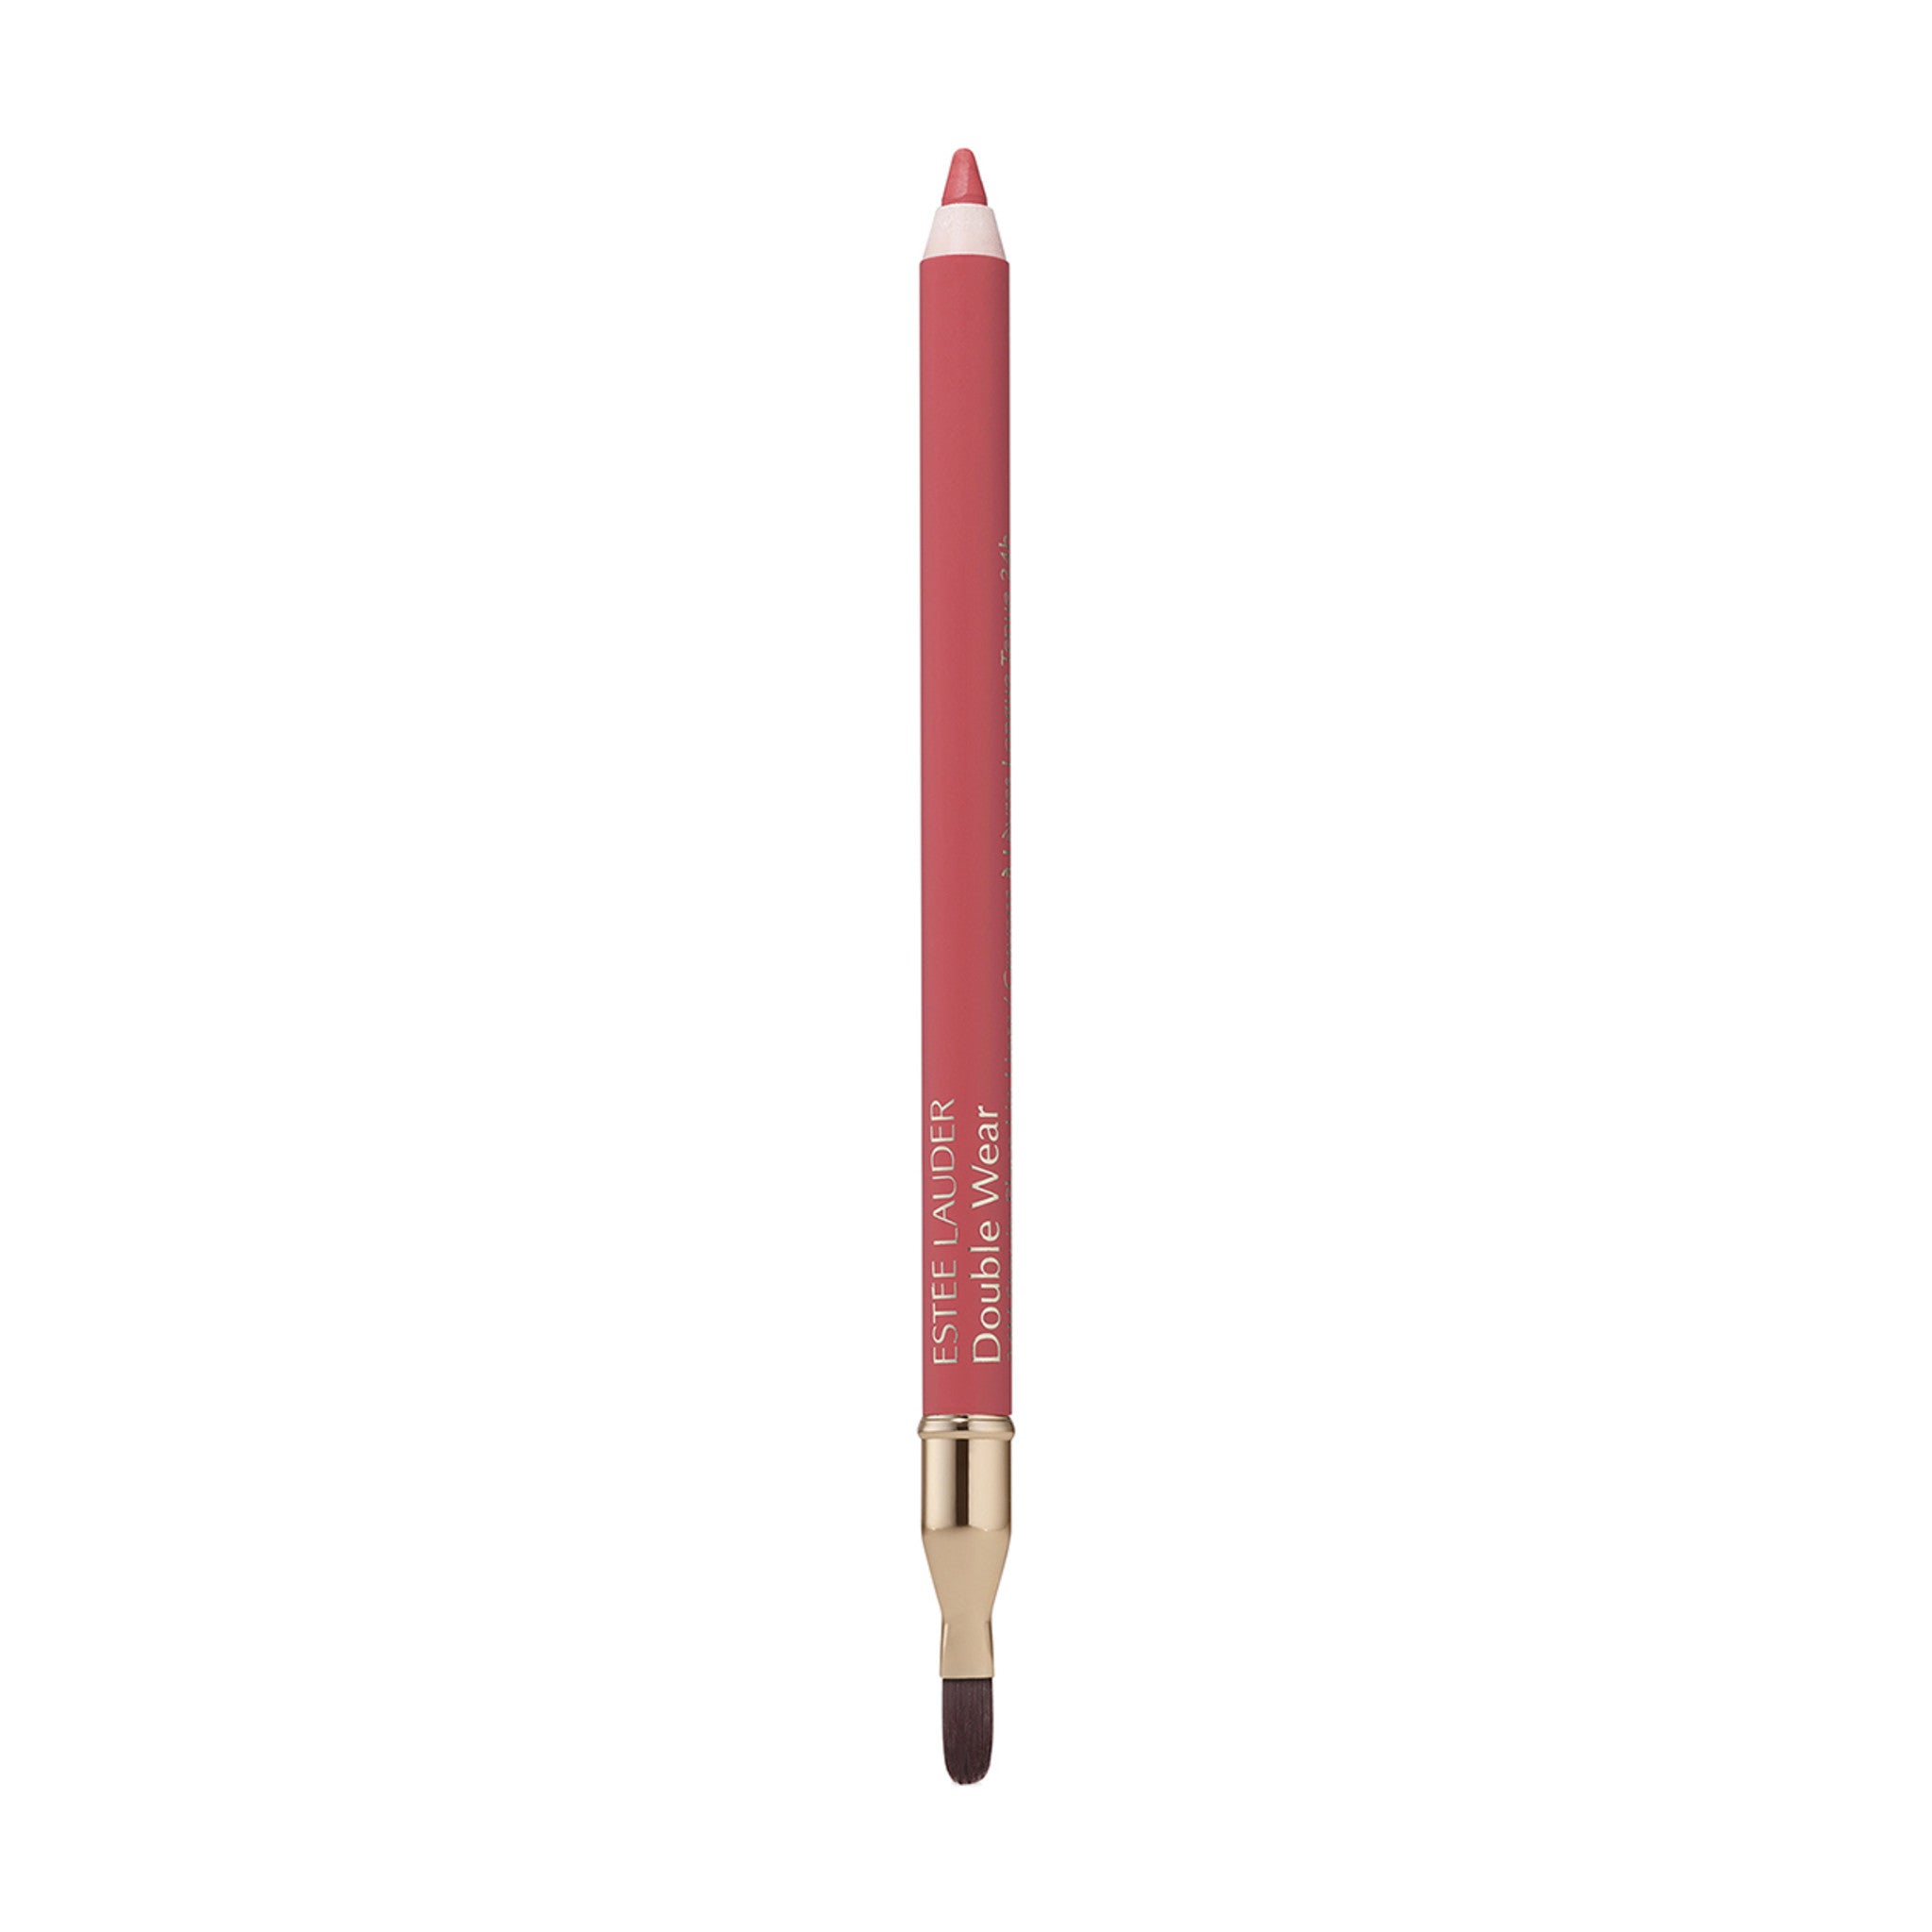 Estée Lauder Double Wear 24H Stay-in-Place Lip Liner Color/Shade variant: Blush main image. This product is in the color brown